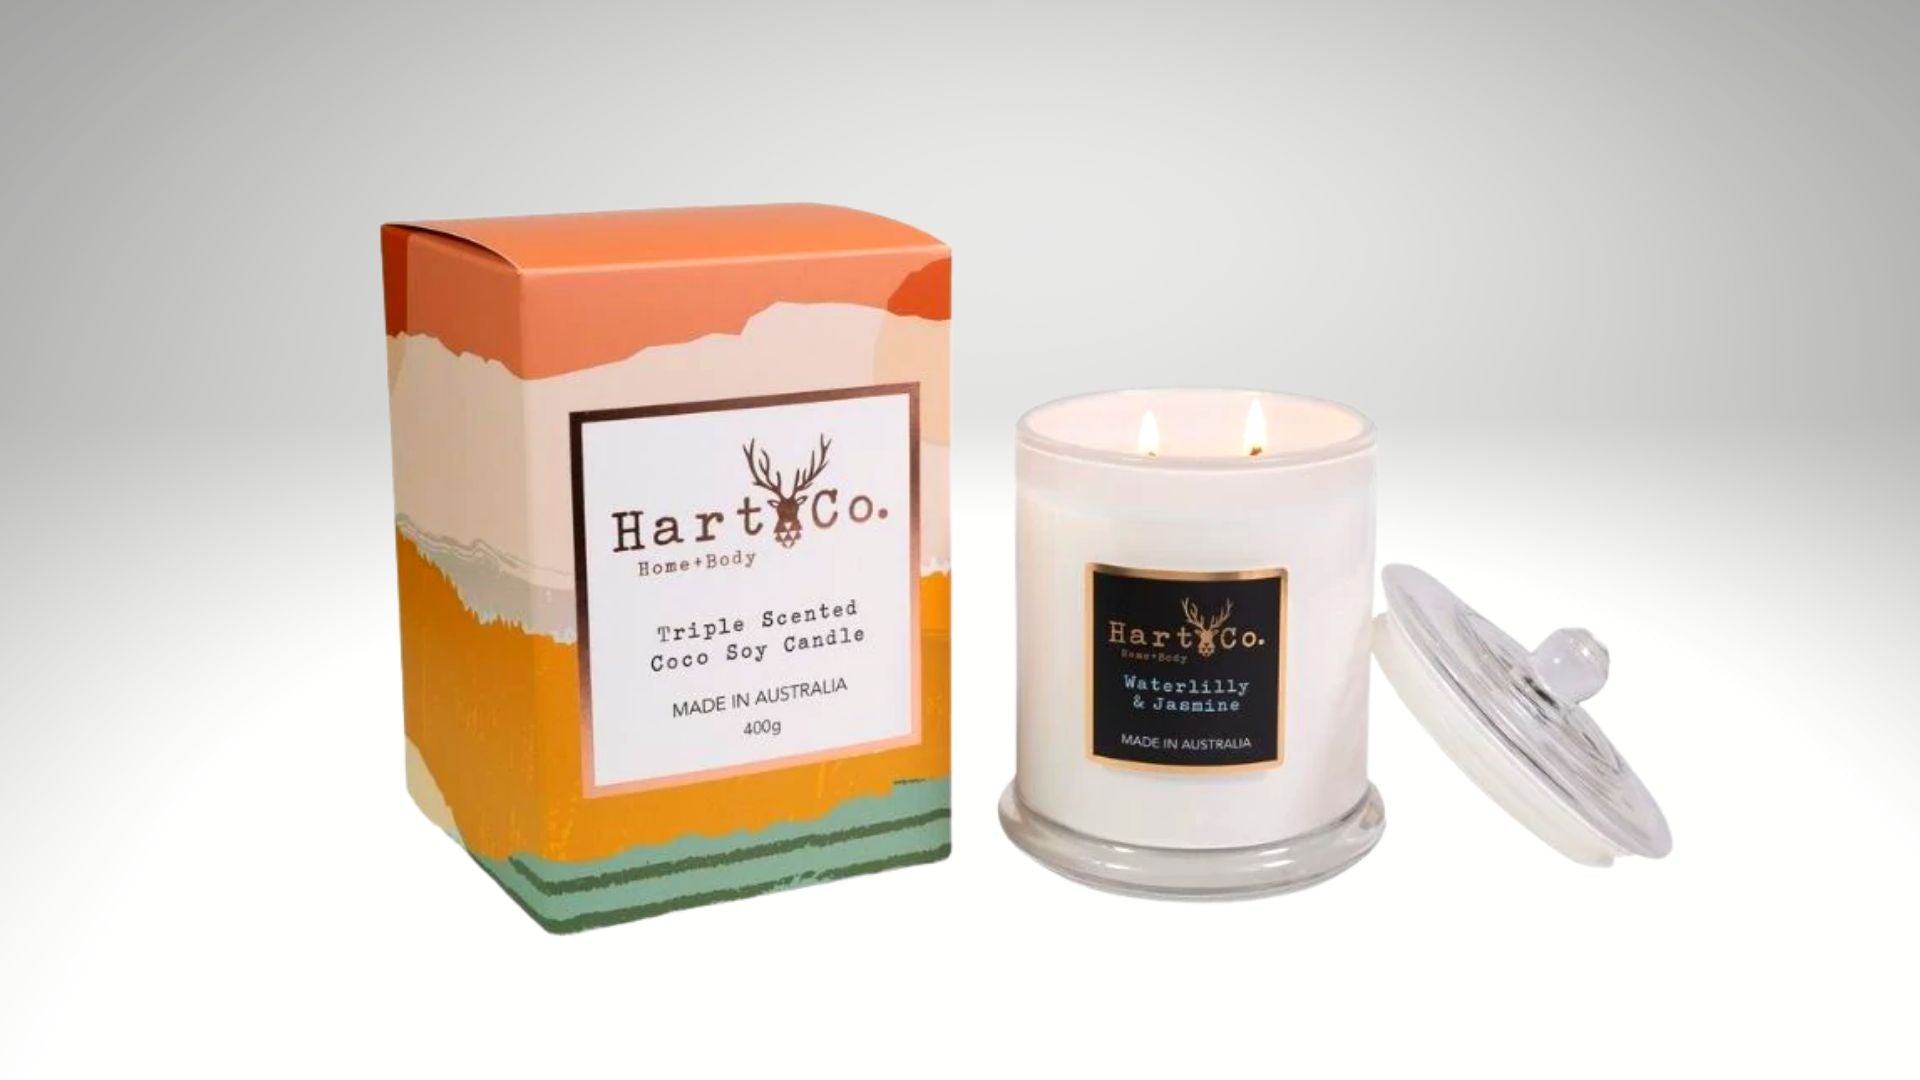 Hart Co Waterlilly & Jasmine Large Double Wick Candle 400g